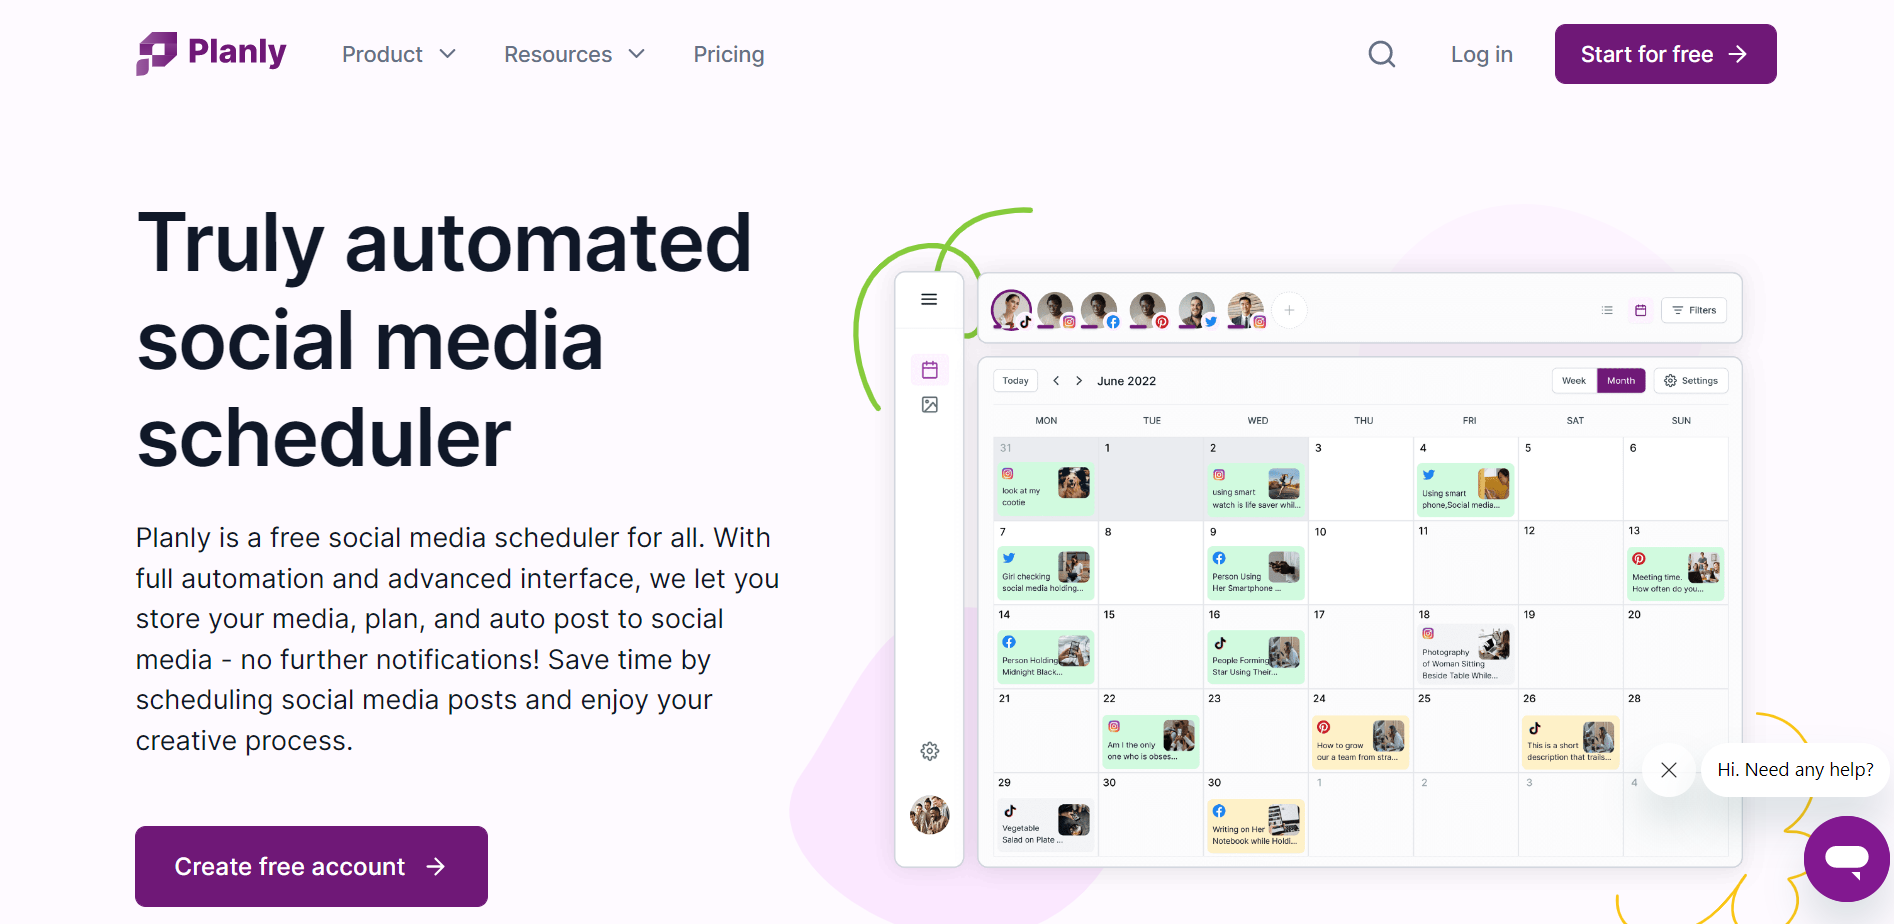 Free social media scheduler for all accounts